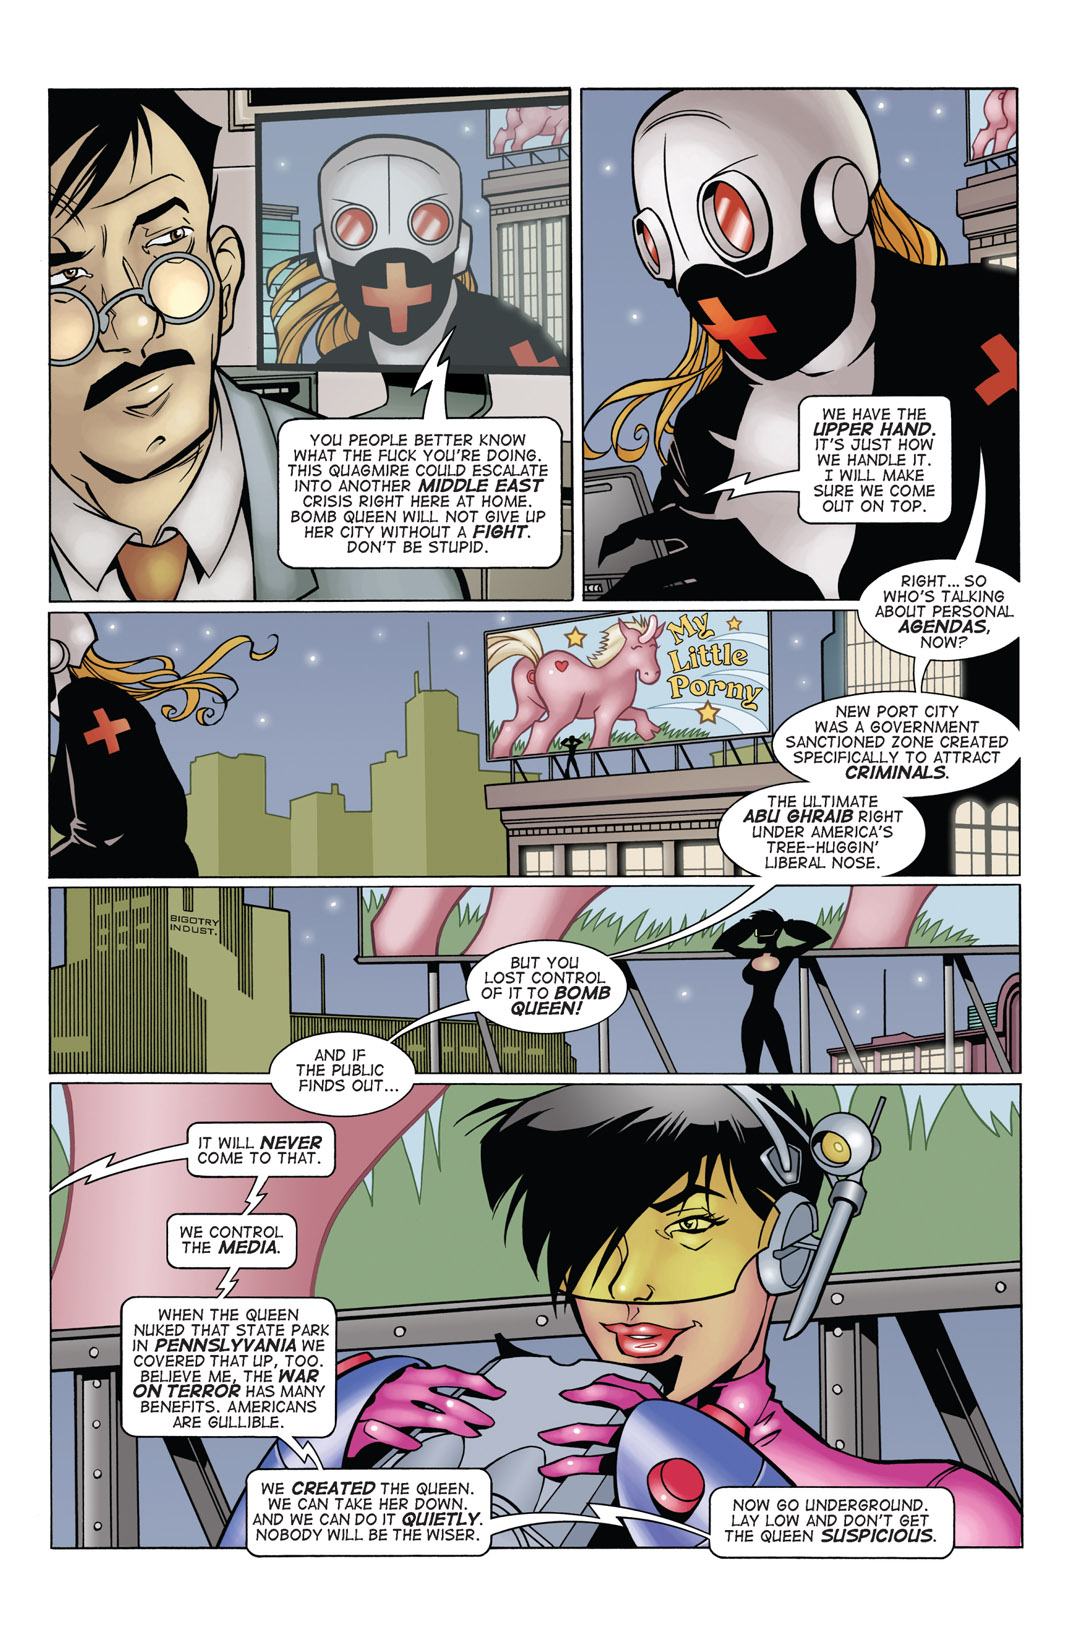 Bomb Queen IV: Suicide Bomber Issue #1 #1 - English 13